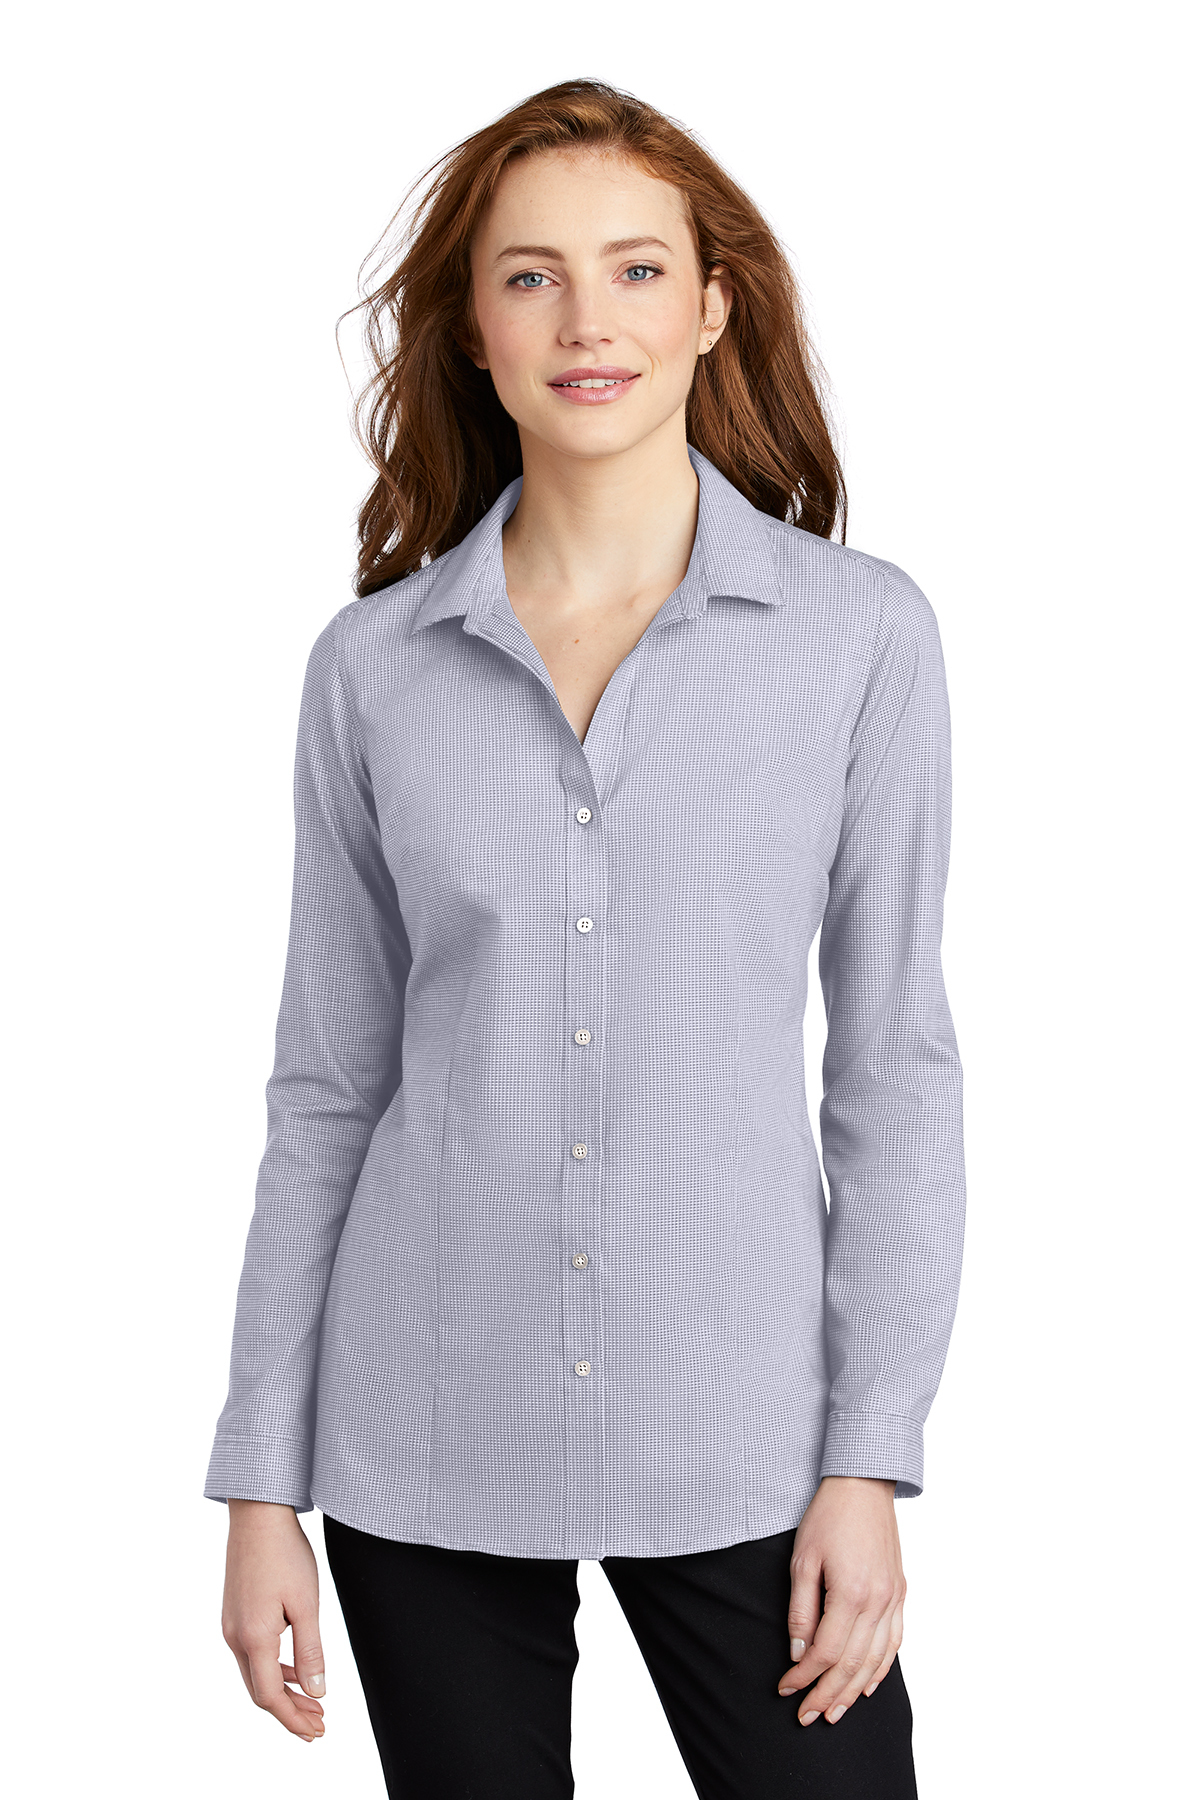 Easy Ladies Authority Authority Pincheck Port Product | Care Port | Shirt